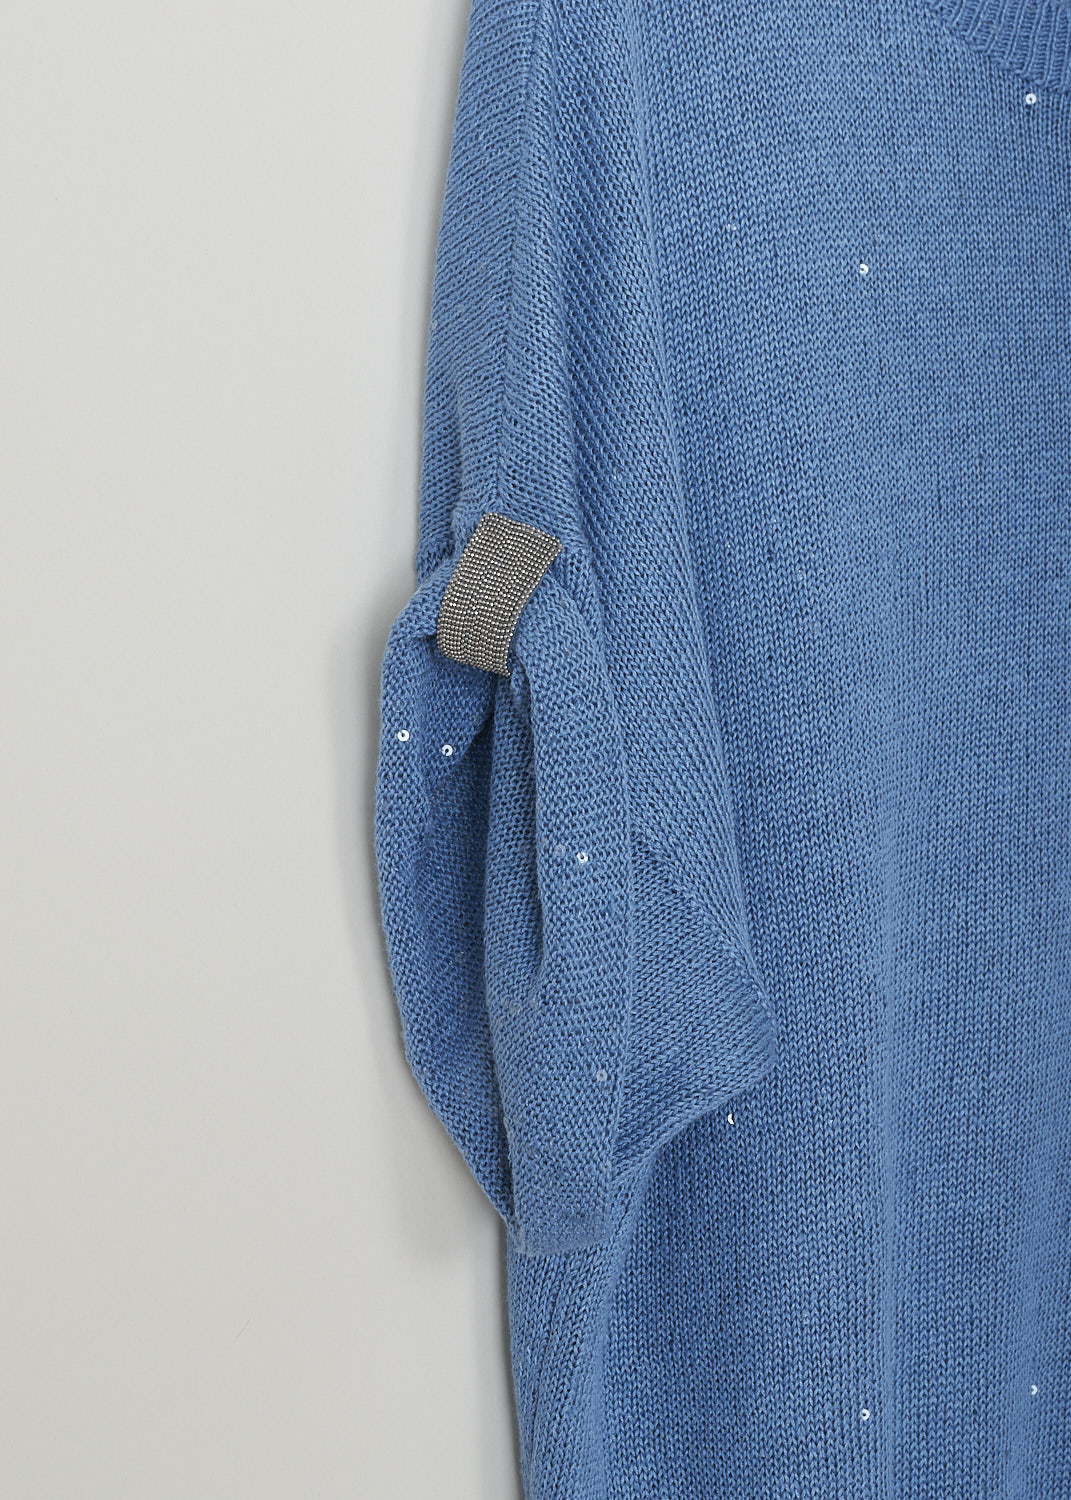 BRUNELLO CUCINELLI, LIGHT BLUE SWEATER WITH SEQUINS, M10552300_C9402, Blue, Detail, This short sleeve light blue sweater has sequins sewn-in throughout. The round neckline, cuffs and hemline have a ribbed finish. The short sleeves are folded and held in place with a monilli decorated strap.
